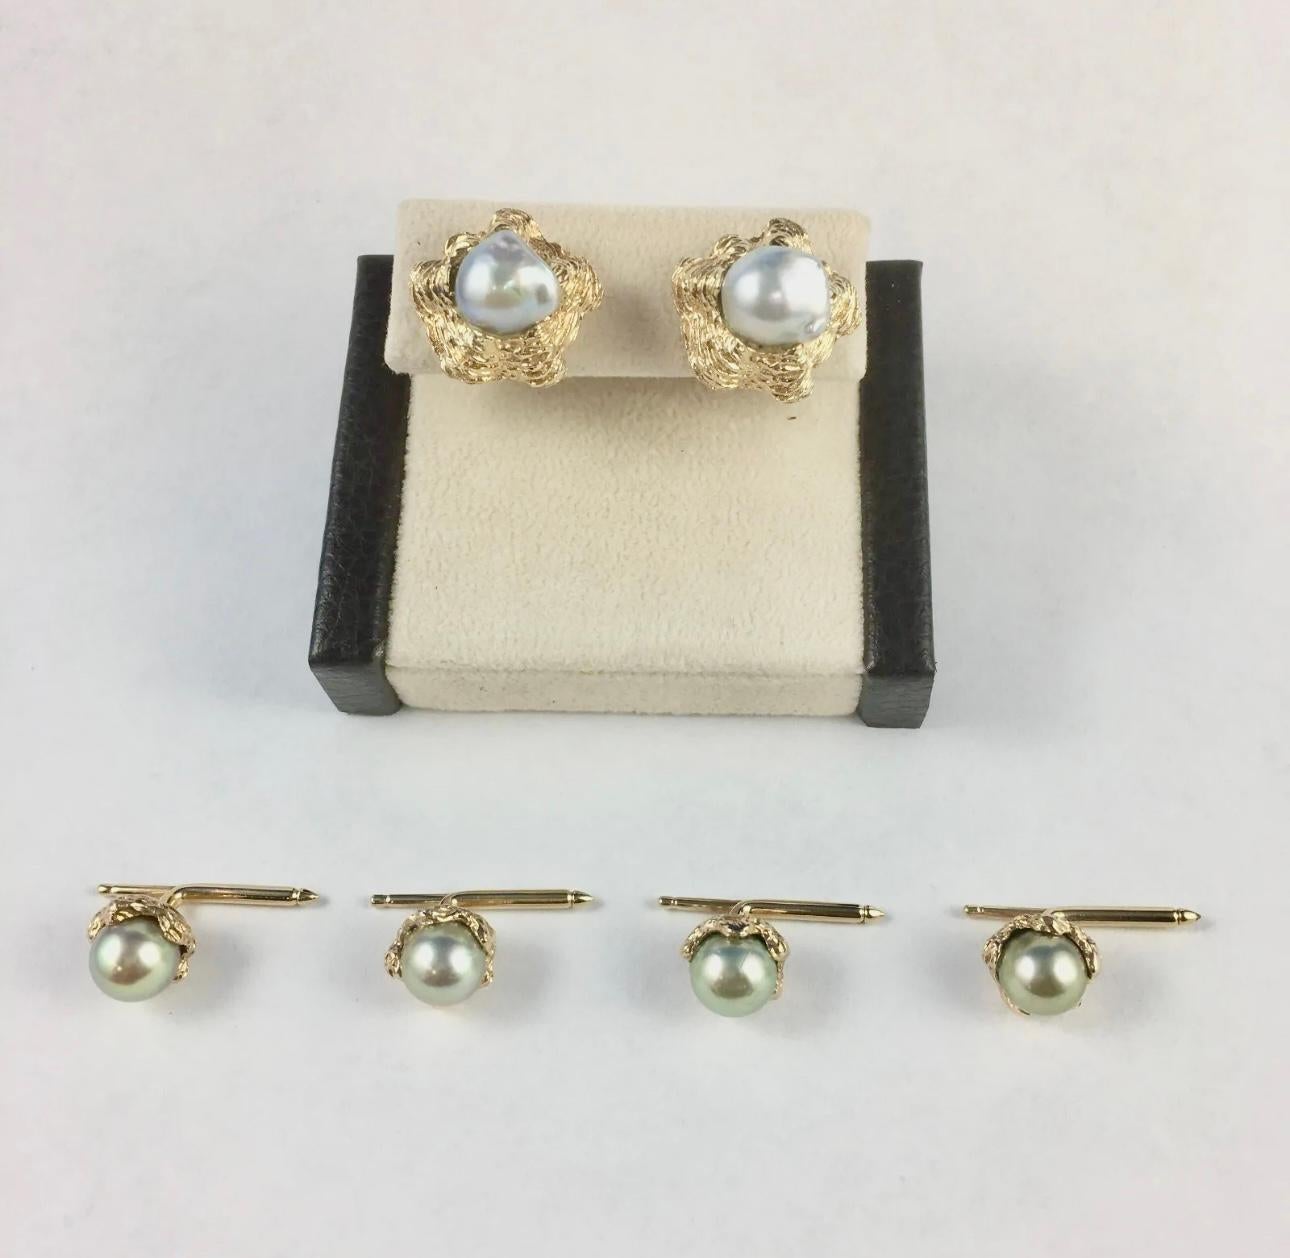 Men's Silver/Grey Fresh Water Pearl & 14k Gold Tuxedo Cufflinks & Studs Set 
* Note Pearls are Baroque Shape*

Description / Condition: New.  All jewelry has been professionally scrutinized and cleaned prior to being offered for sale.